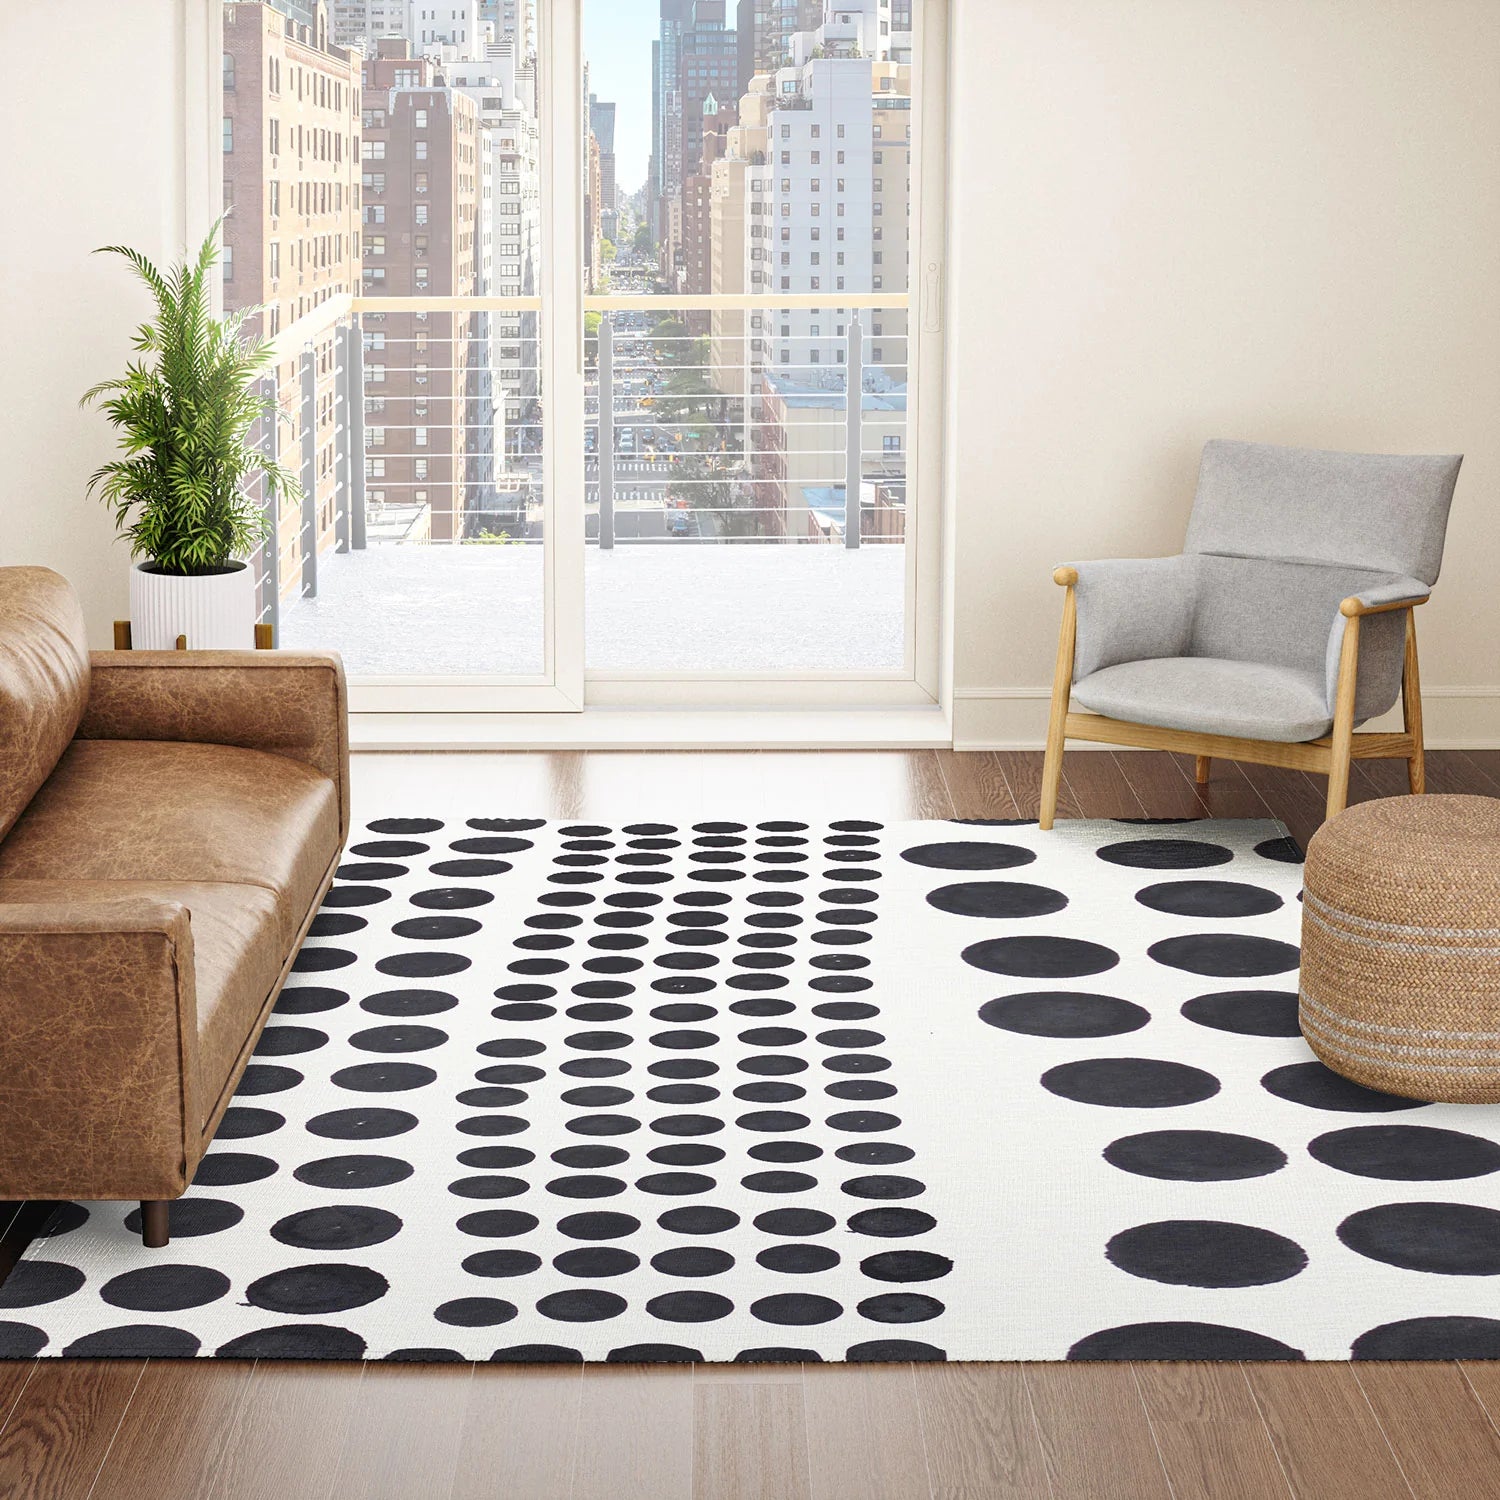 "dots of difference" area rug